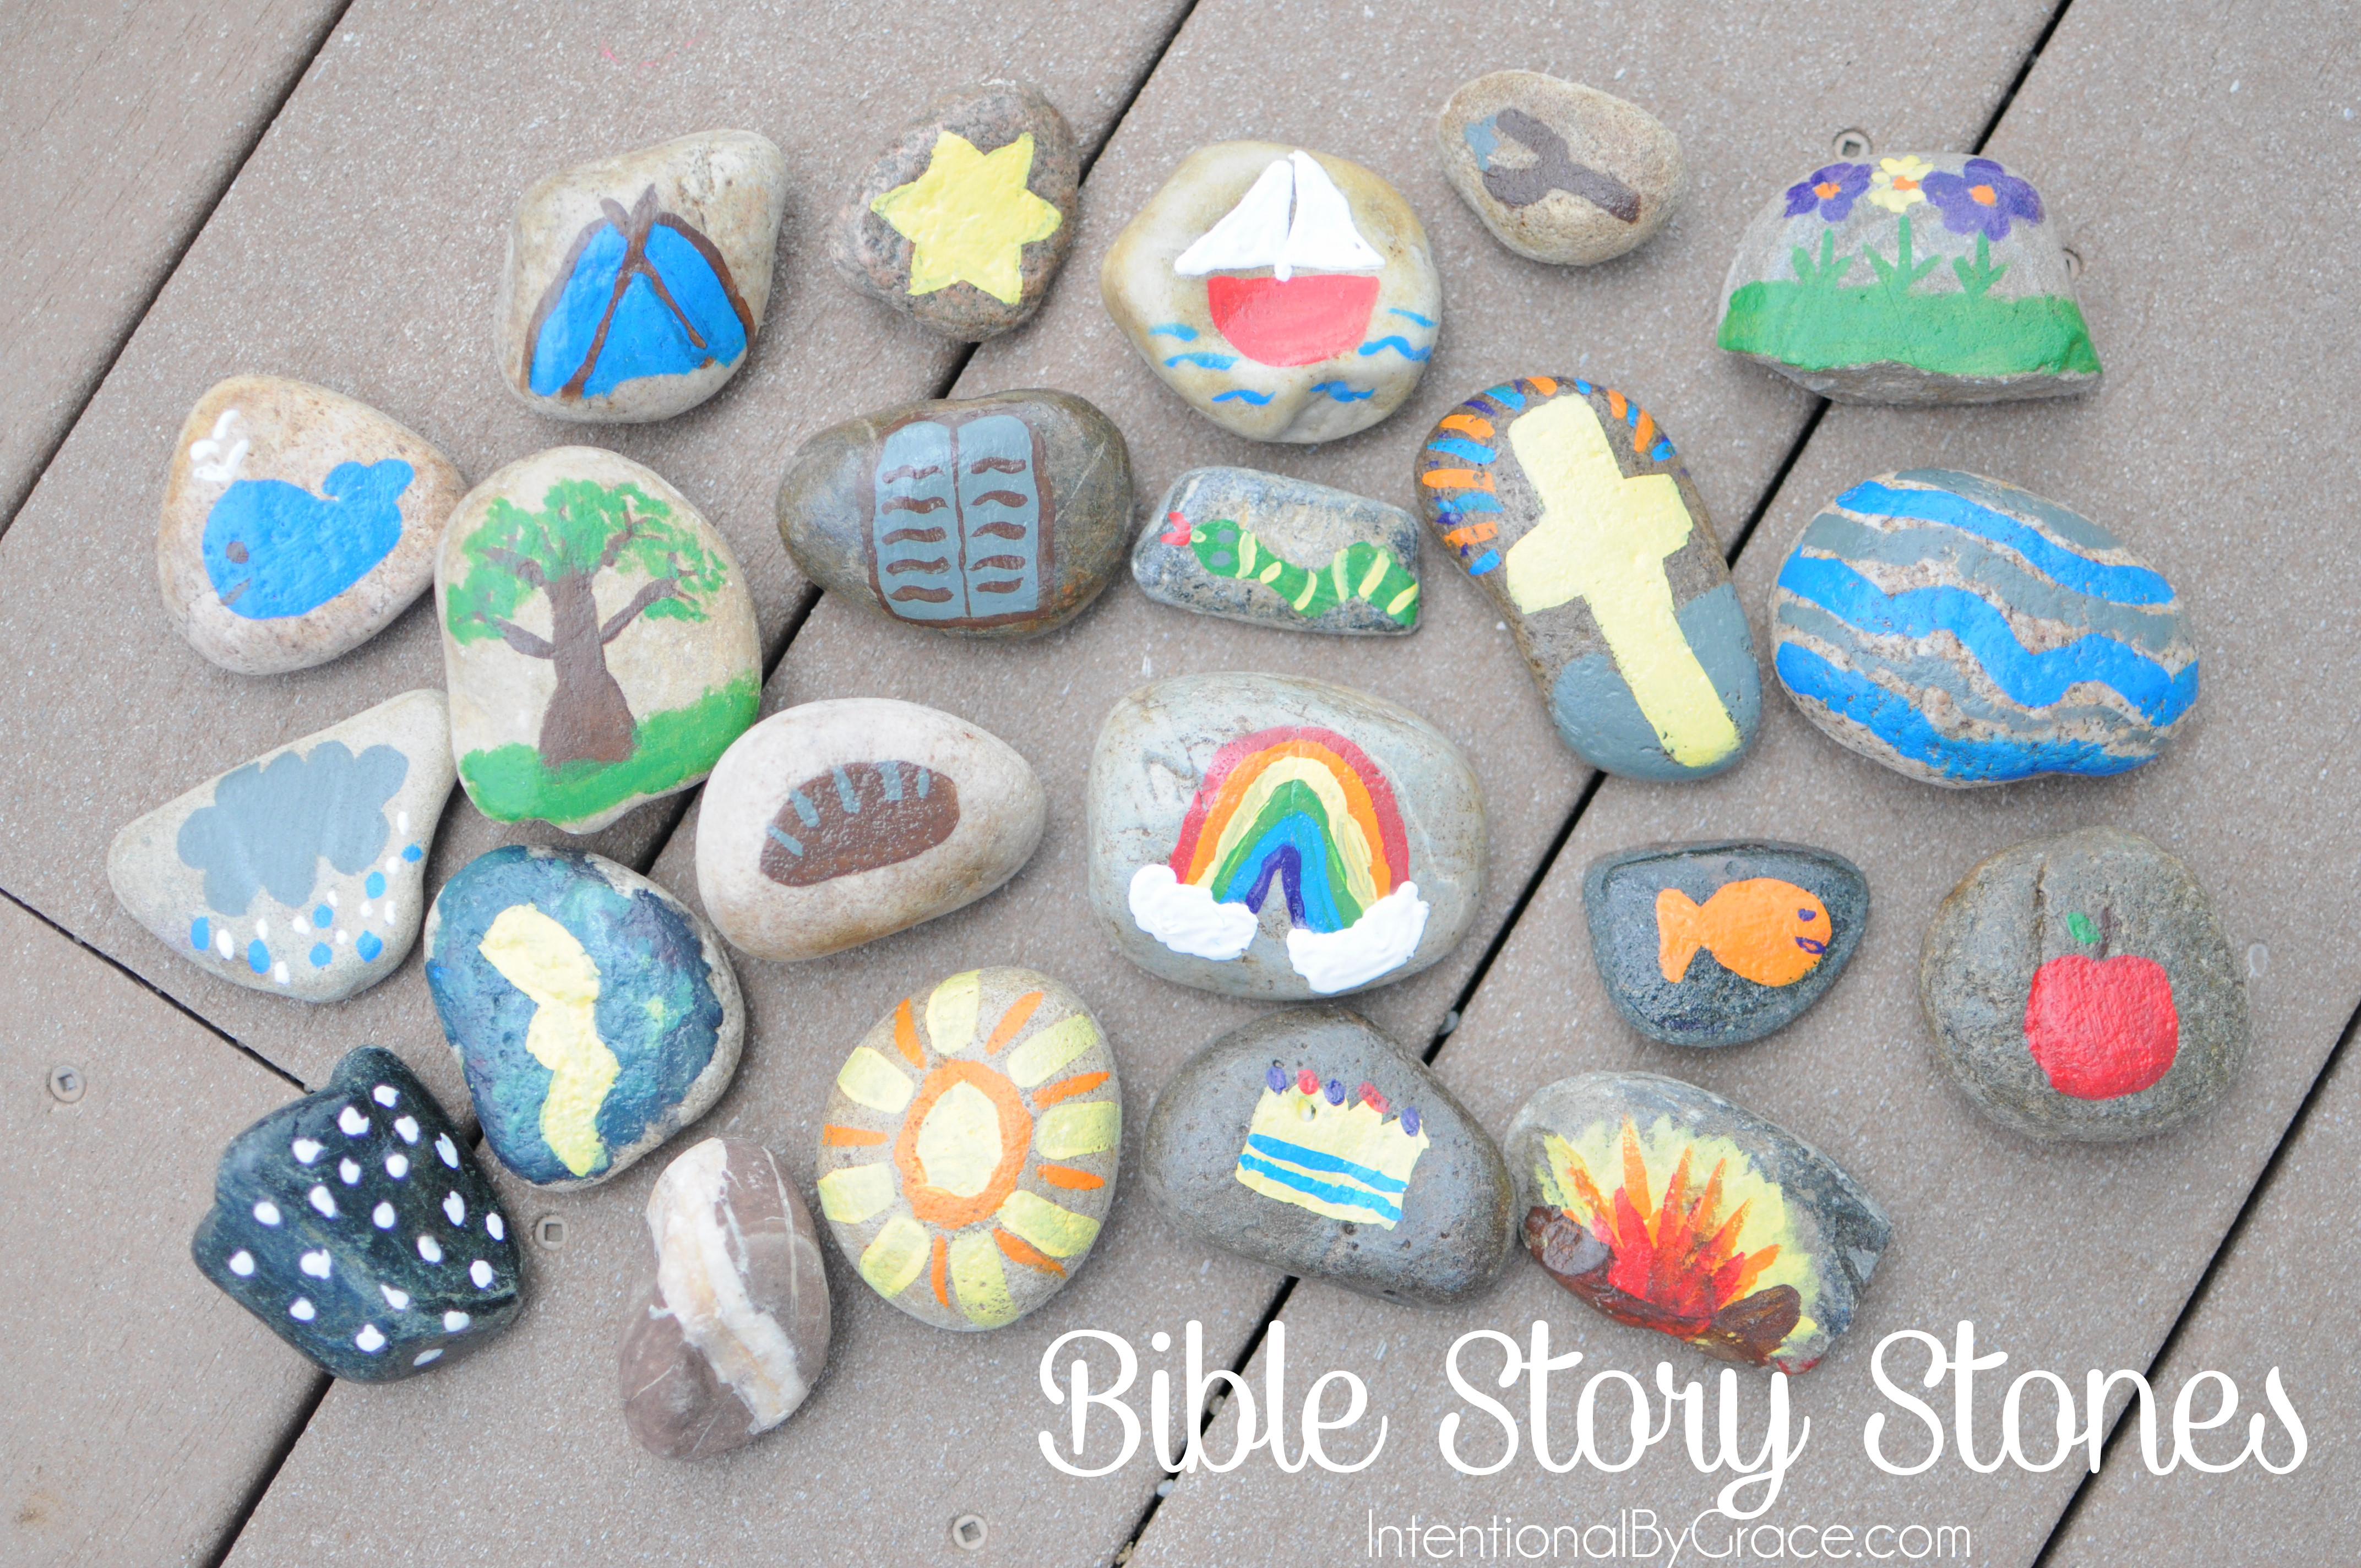 Toddlers Bible Crafts
 How to Make Bible Story Stones Intentional By Grace